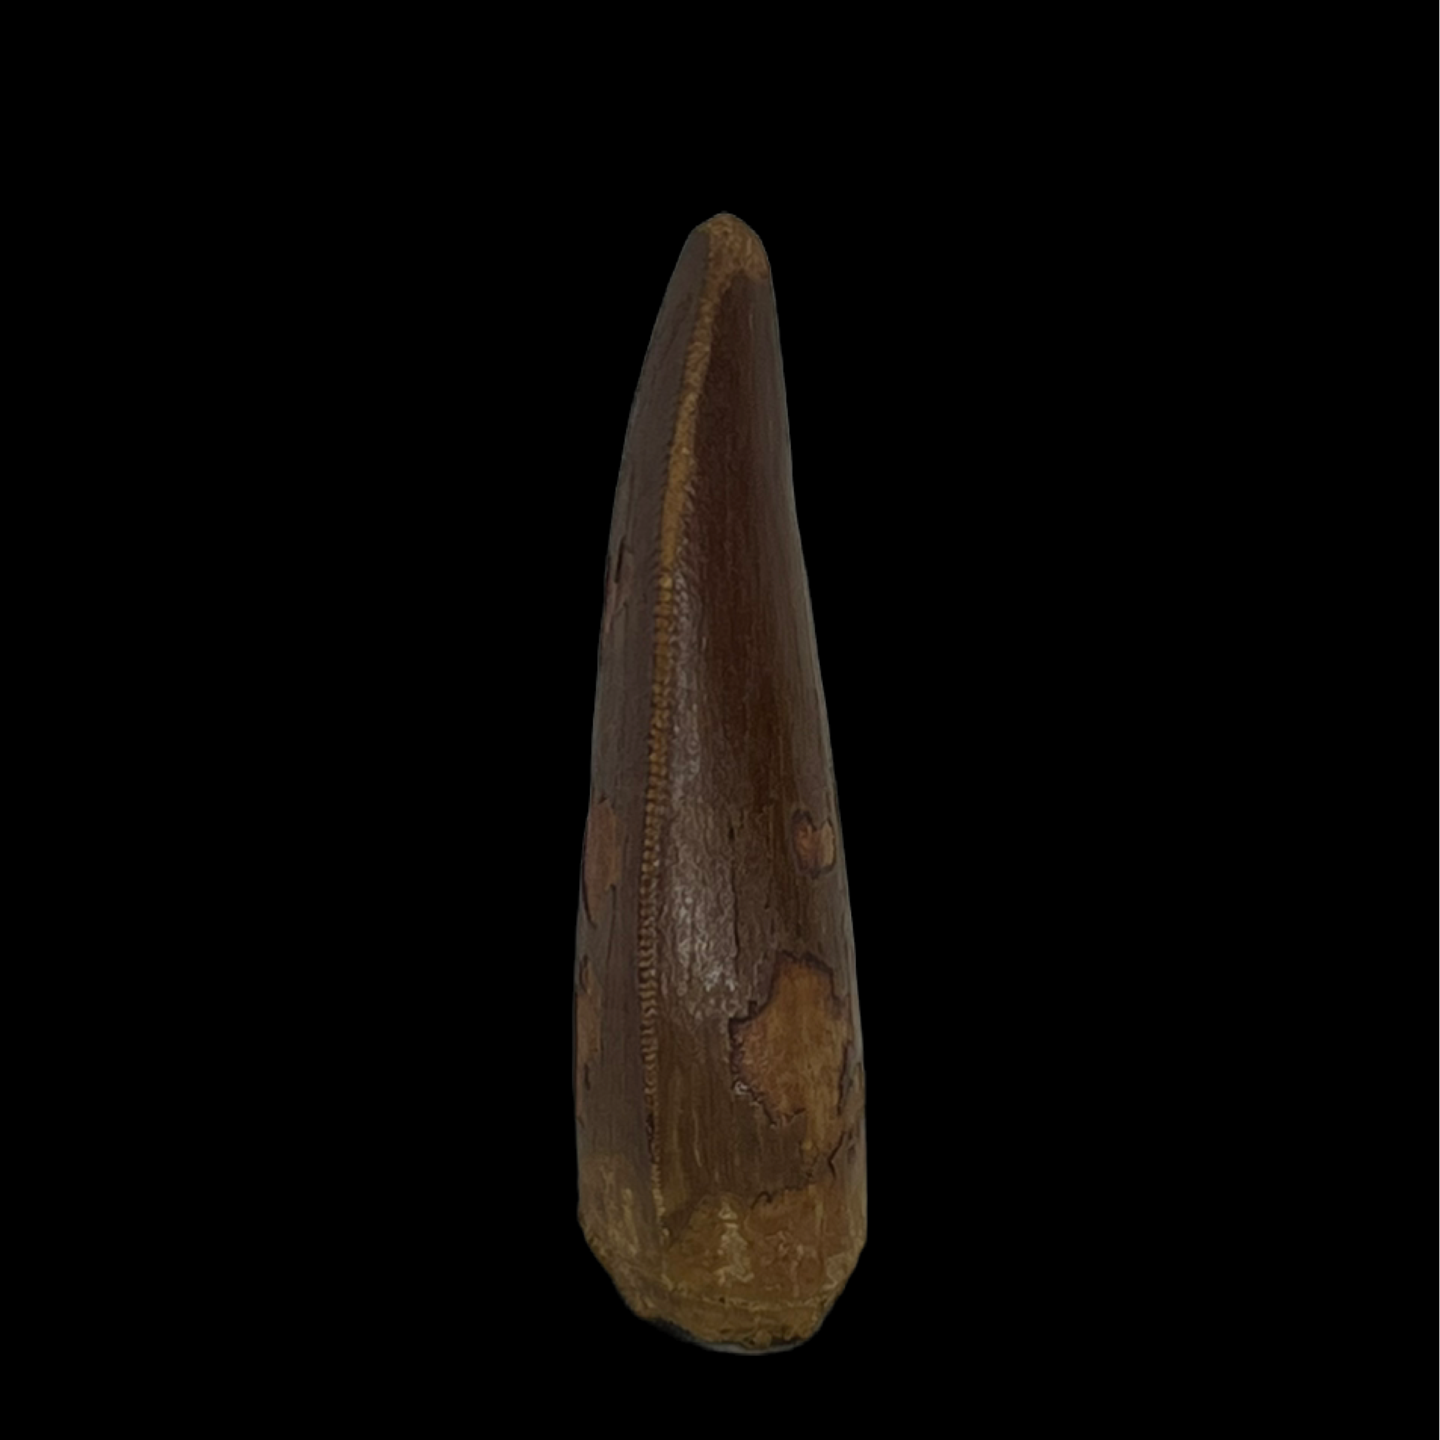 Carcharodontosaurus Tooth 02 (2 in)